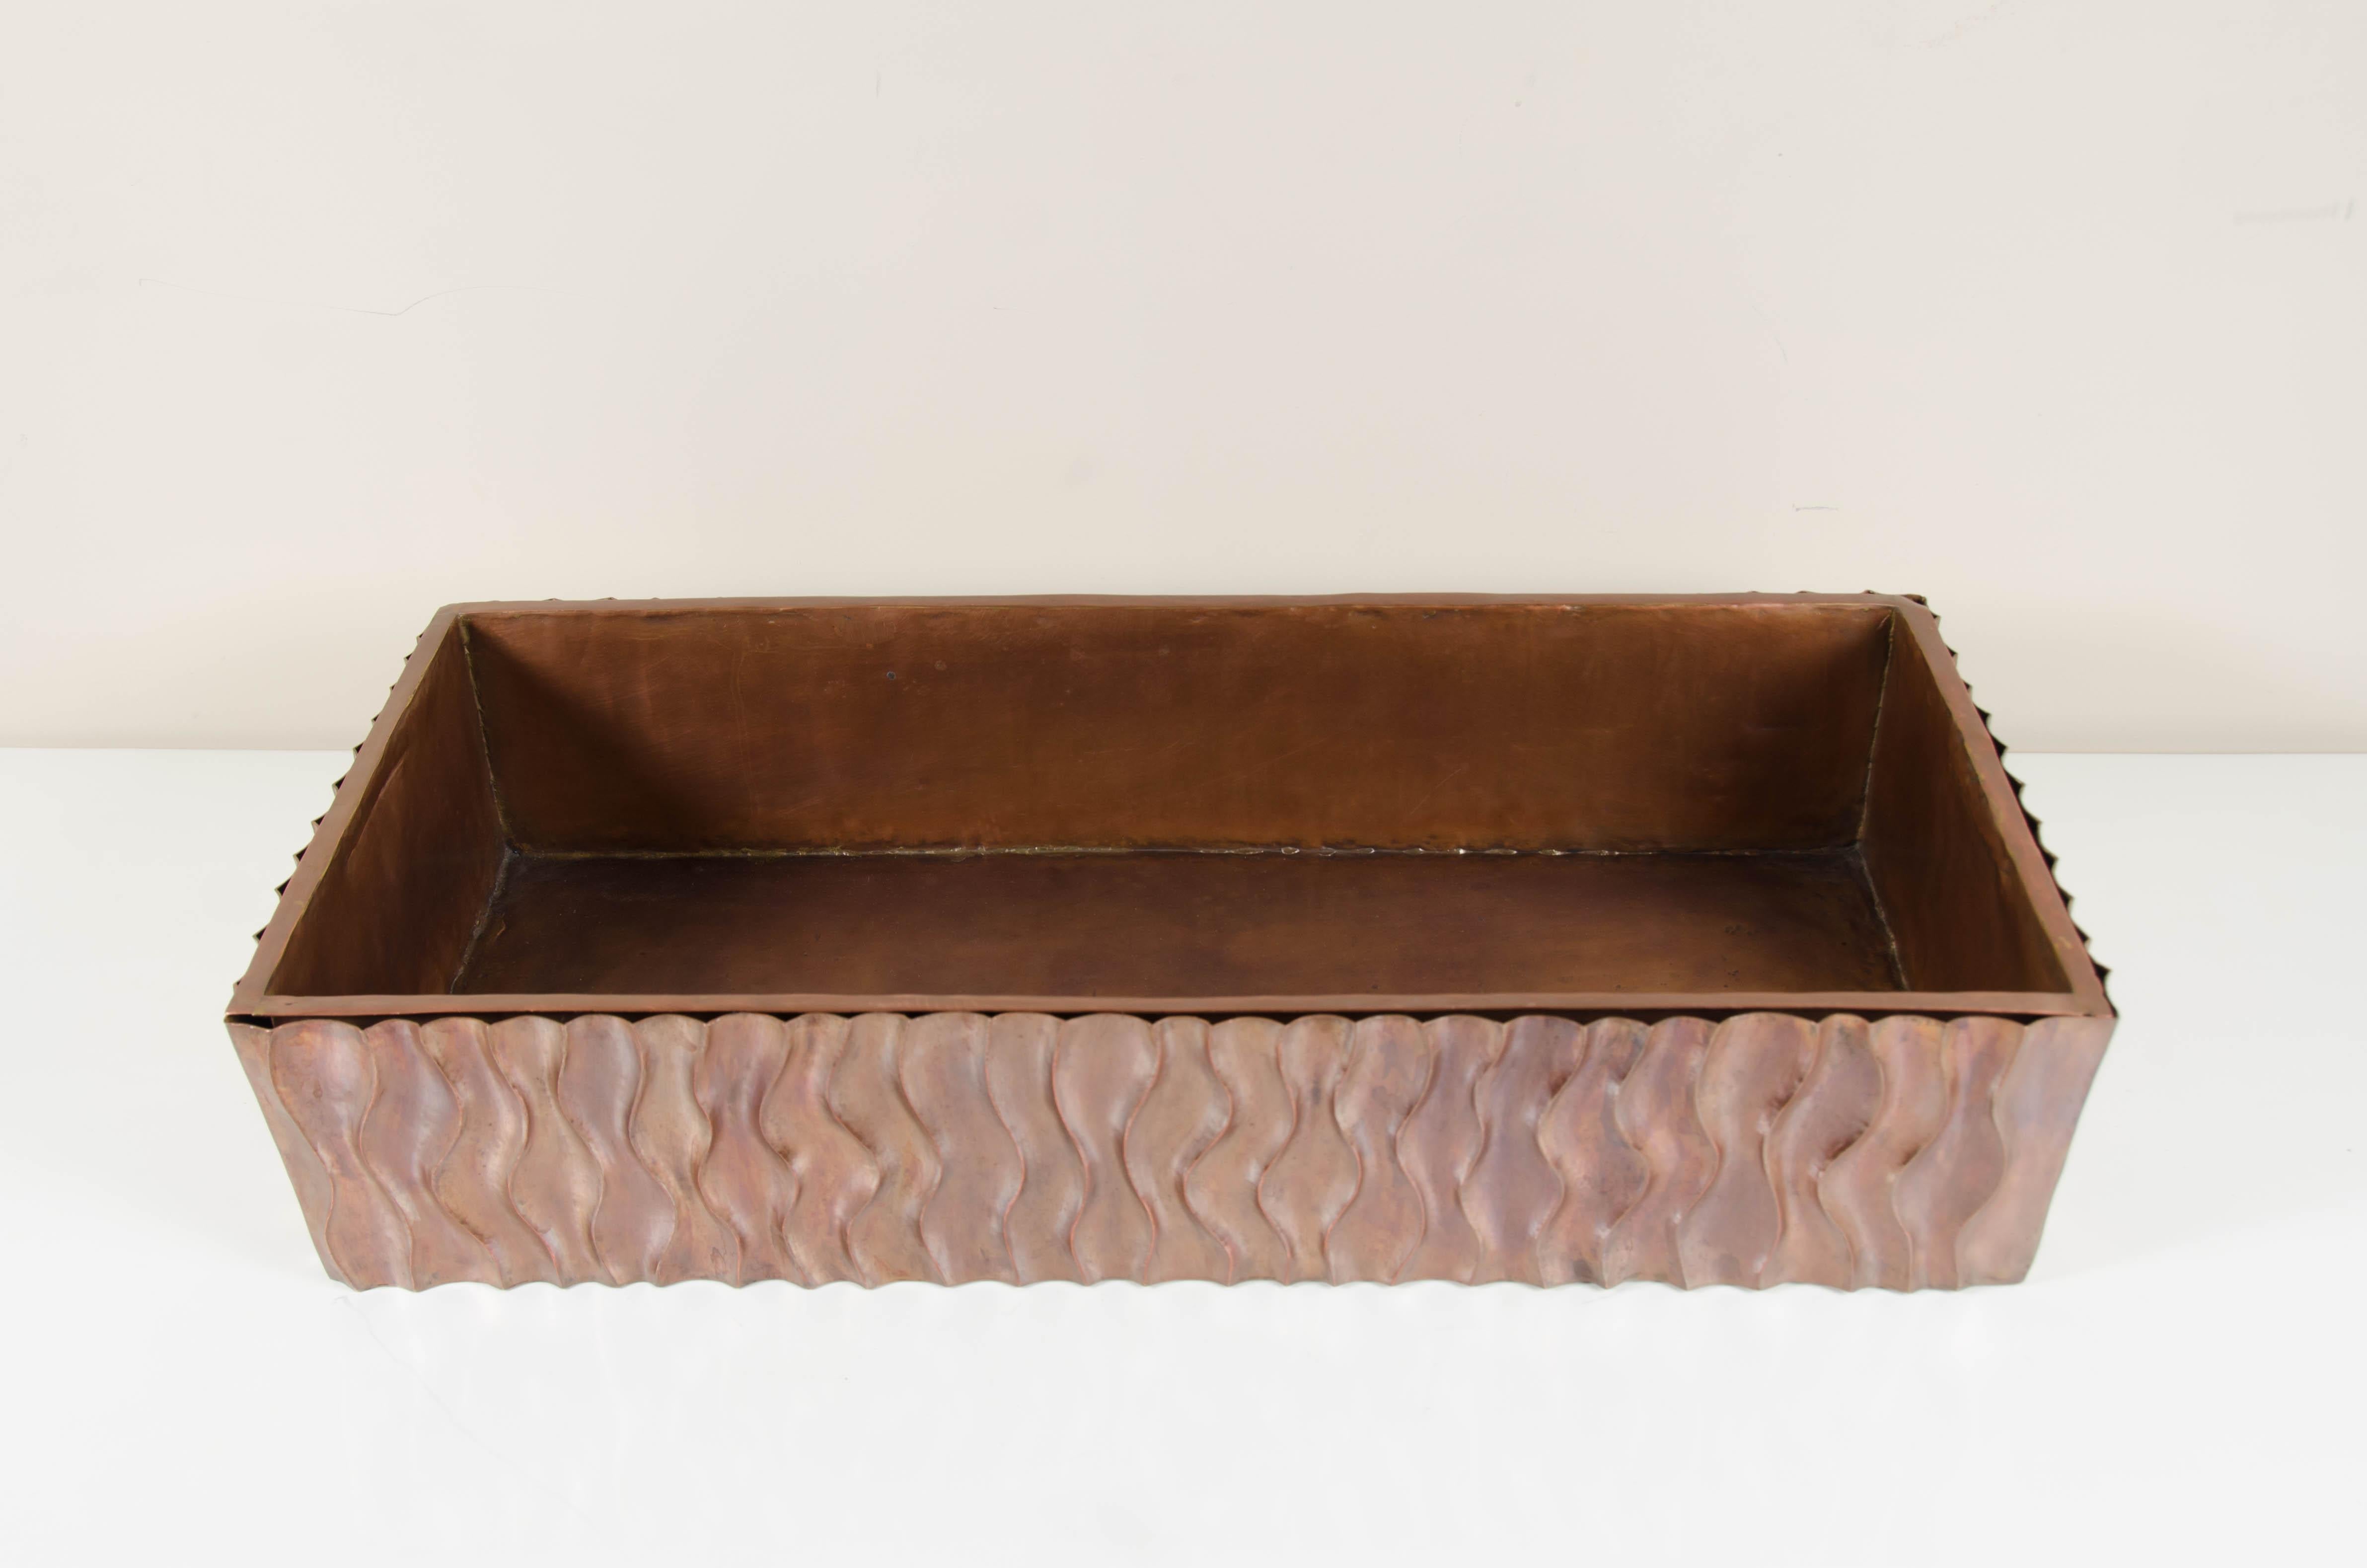 Contemporary Ola Design Planter with Liner, Antique Copper by Robert Kuo, Limited Edition For Sale